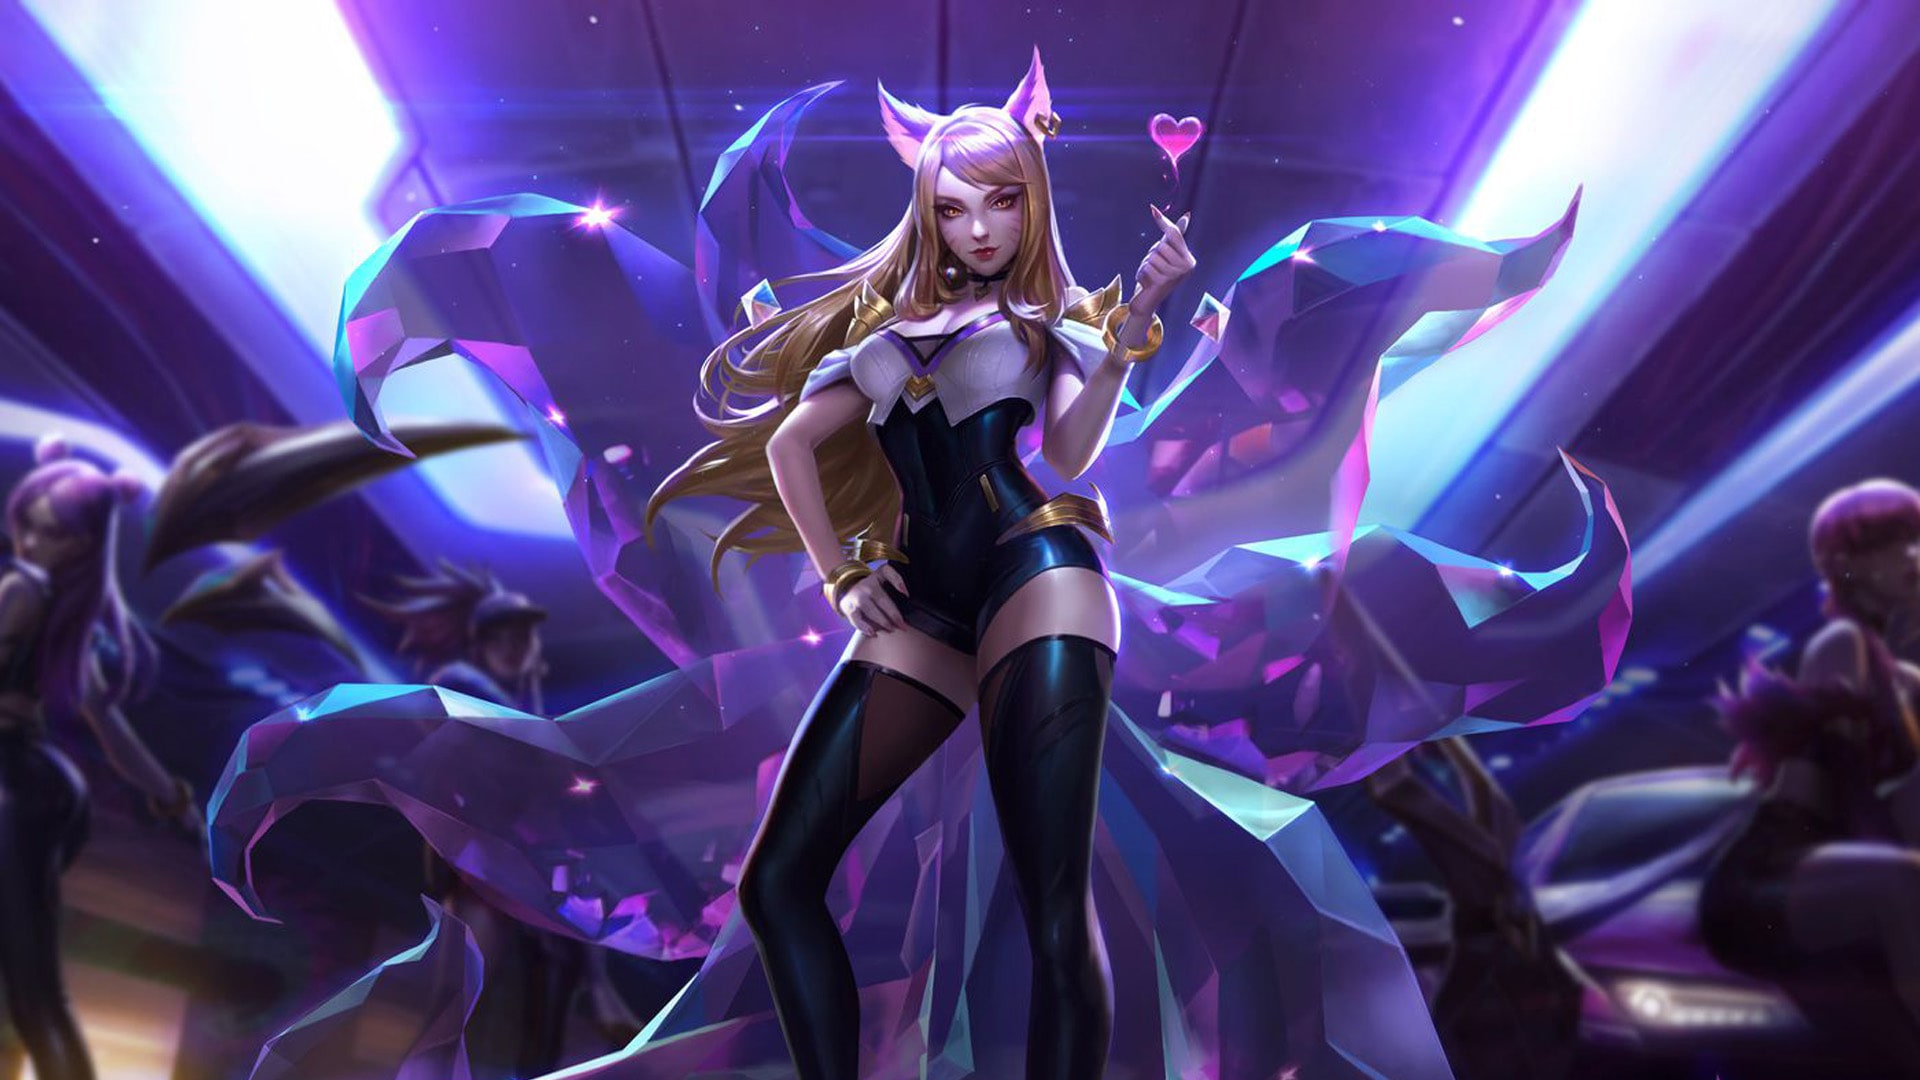 Image of K/DA, a virtual pop group from League of Legends, during a performance scene